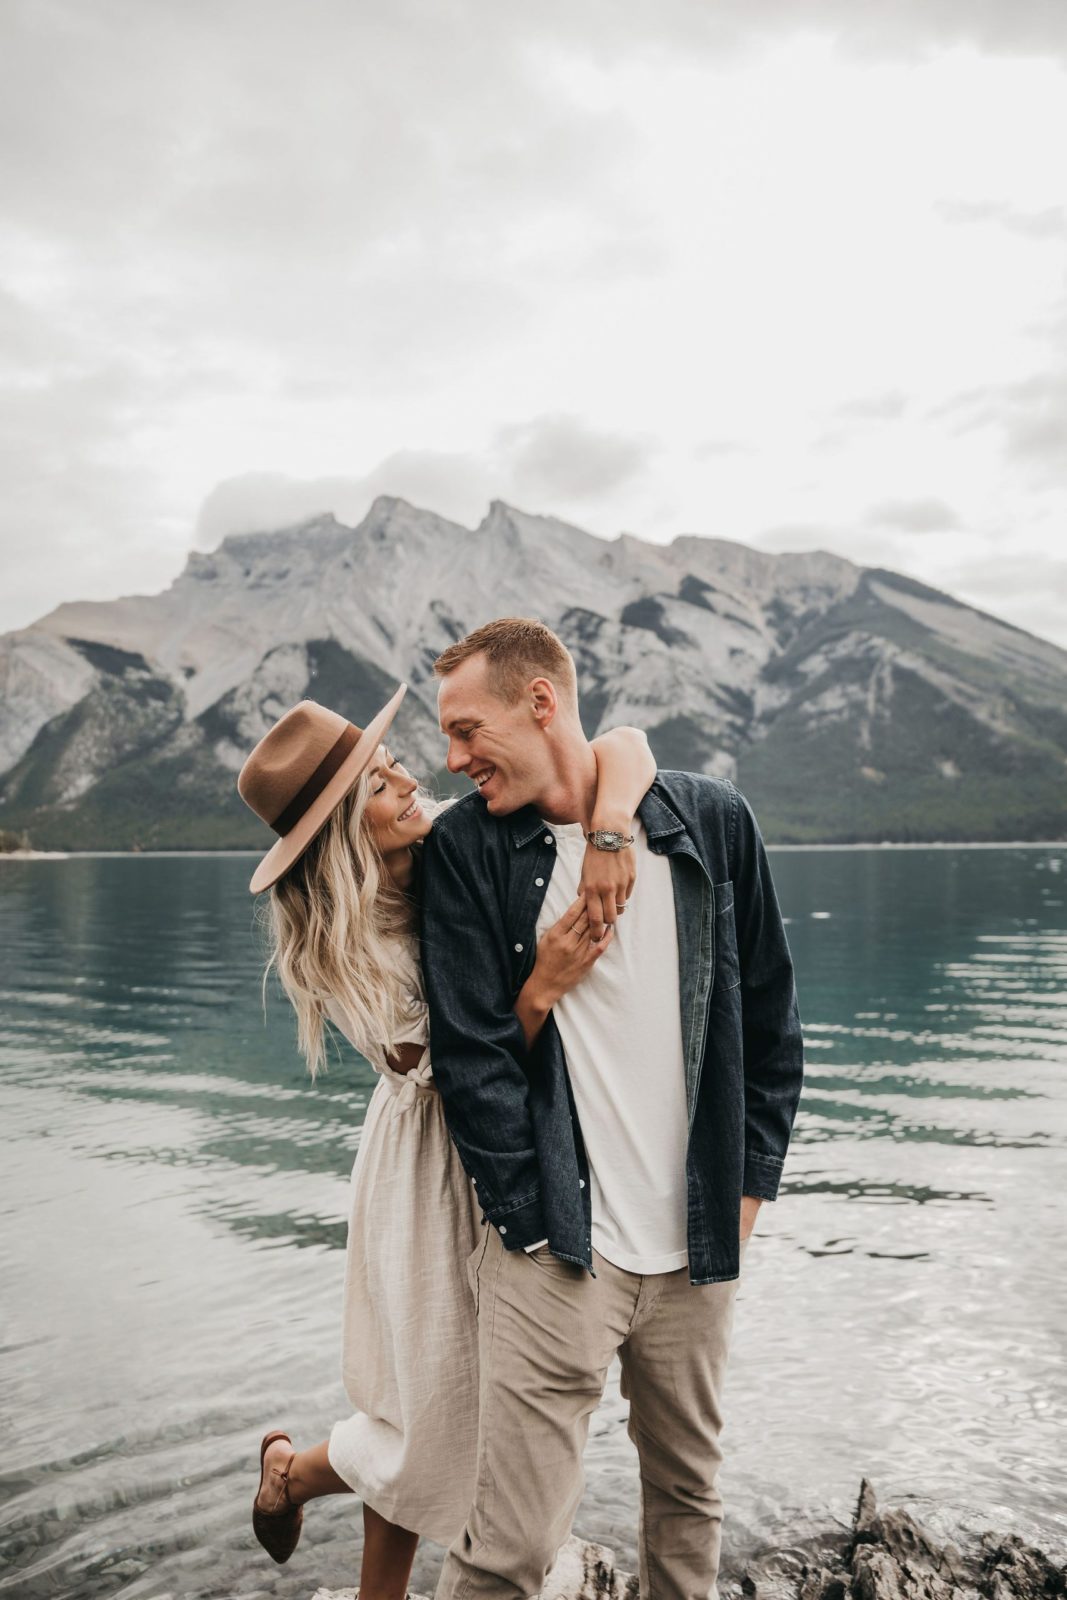 Engagement session outfit tips from Kadie HummelPhotography